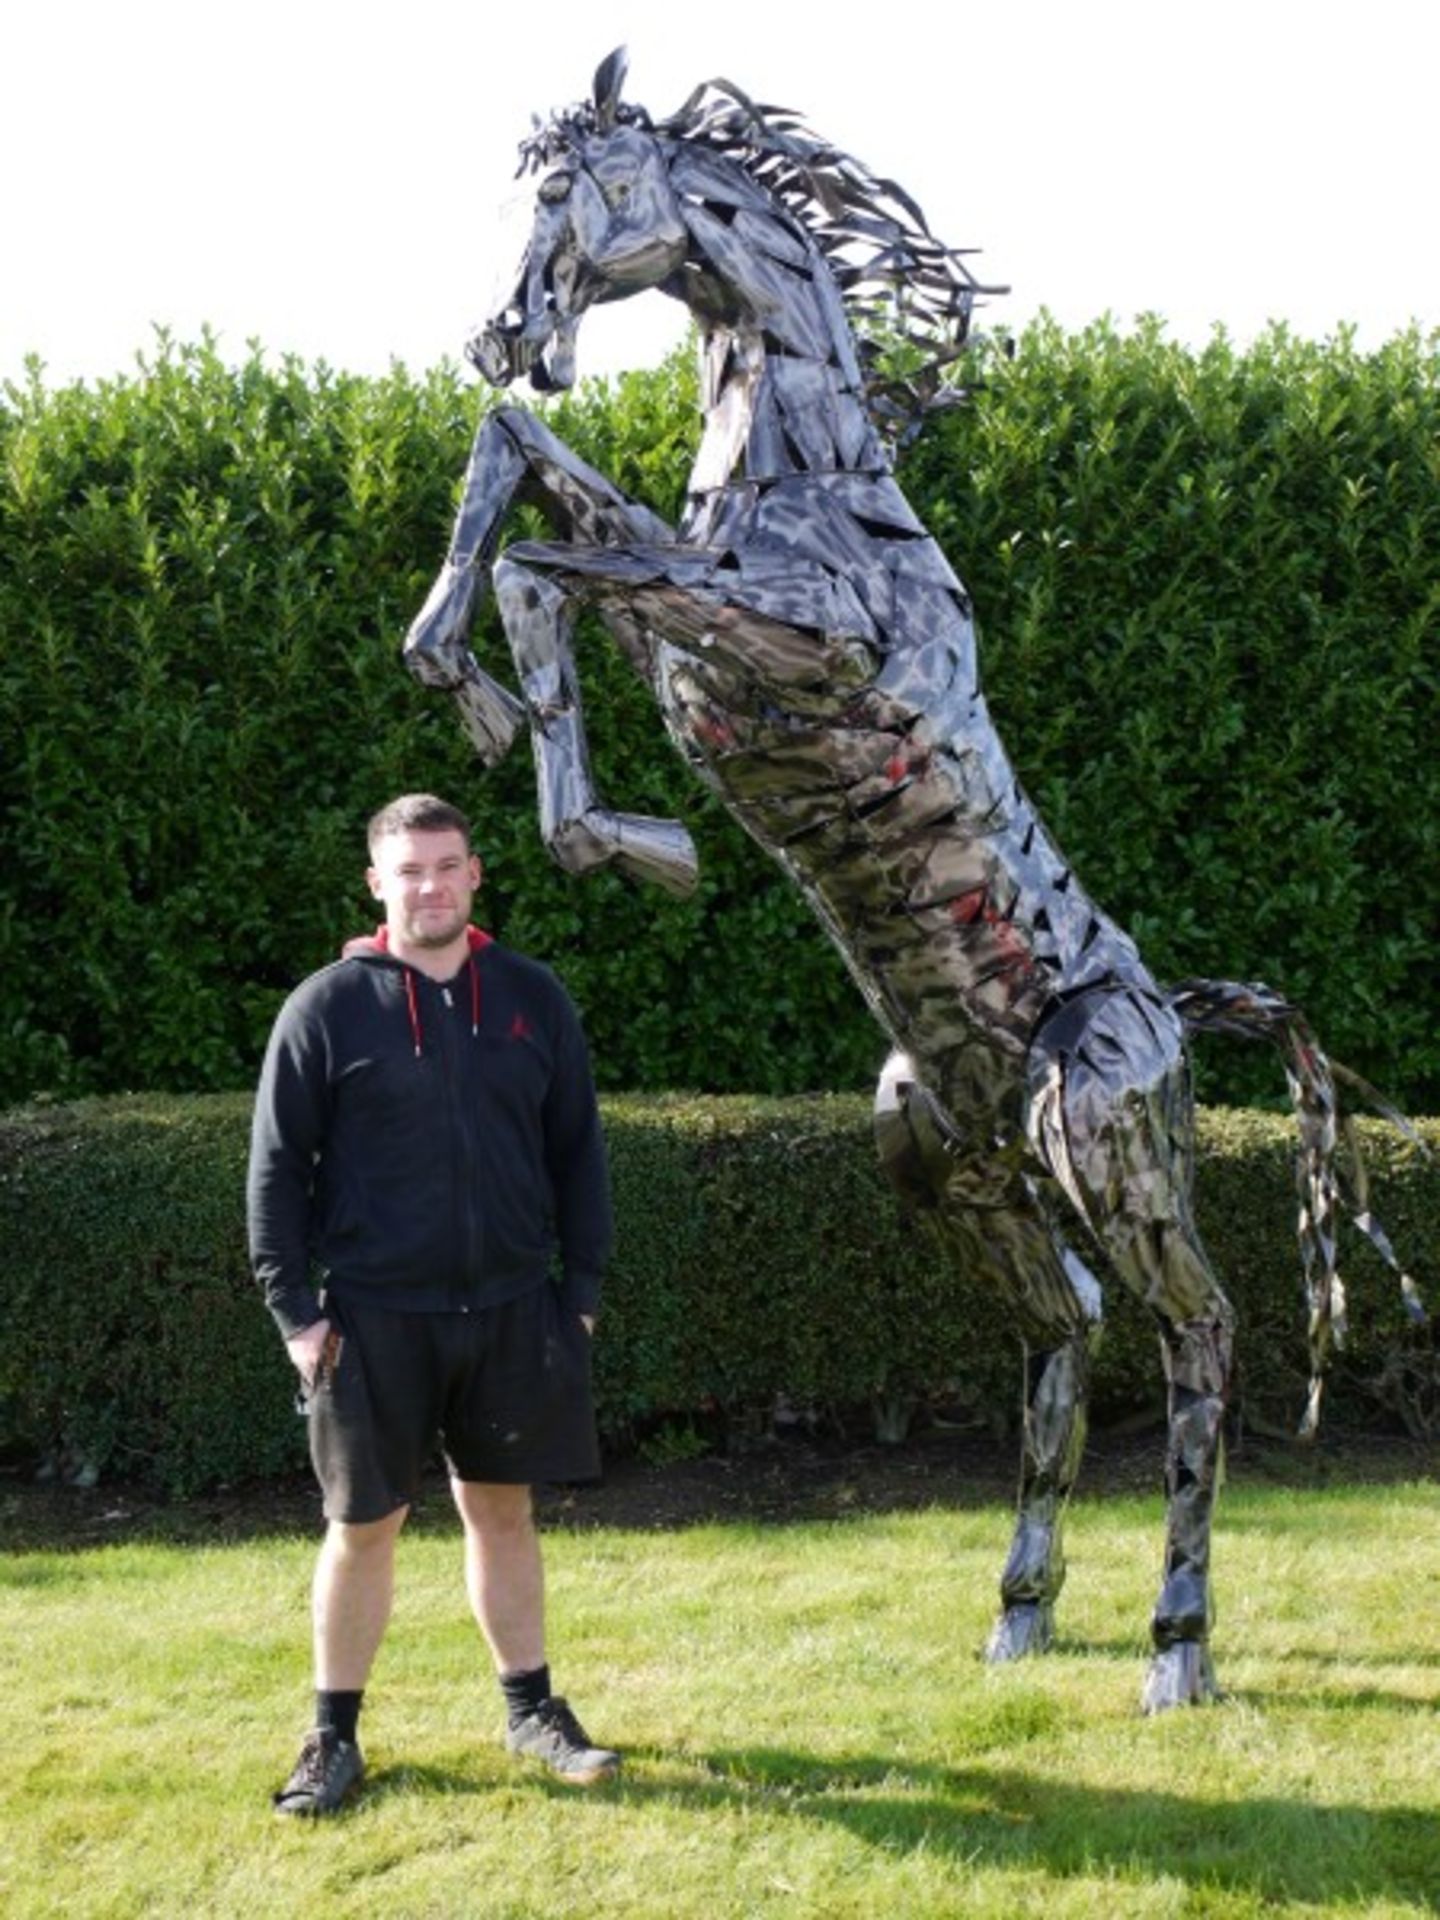 HUGE REARING HORSE STATUE 11FT HIGH - Image 2 of 5